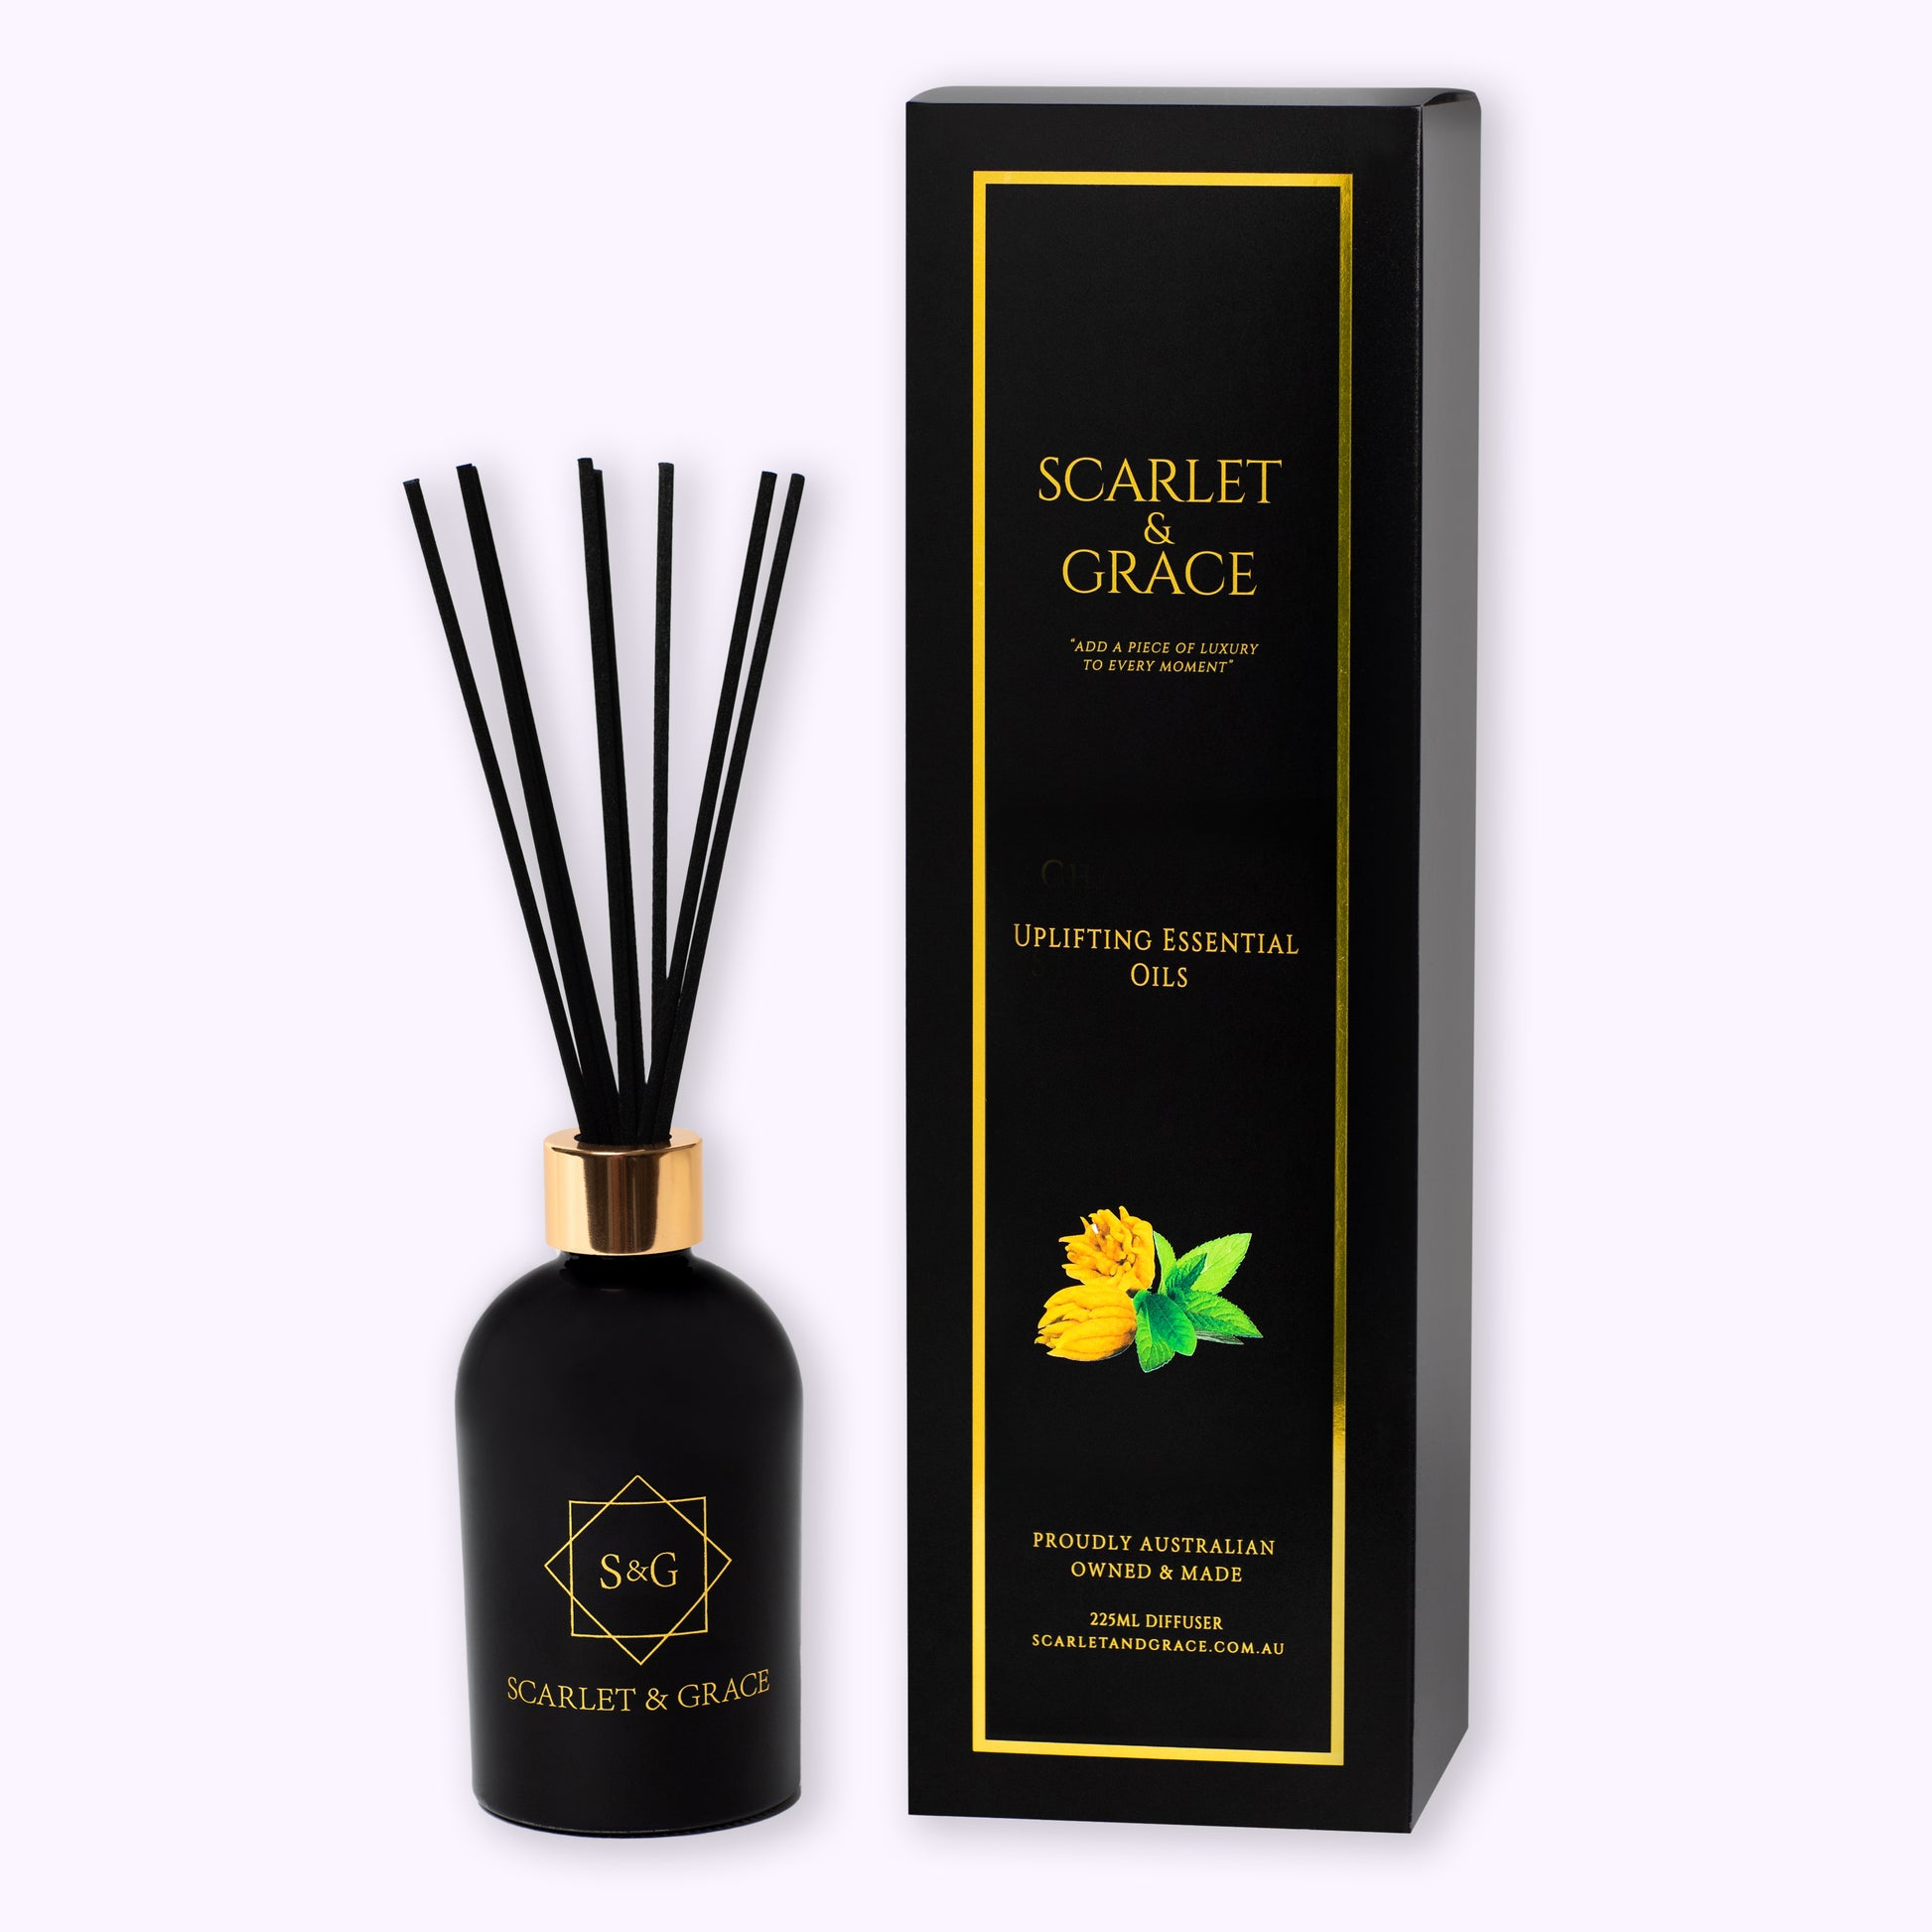 Uplifting Essential Oils - 225ml Reed Diffuser - Scarlet & Grace